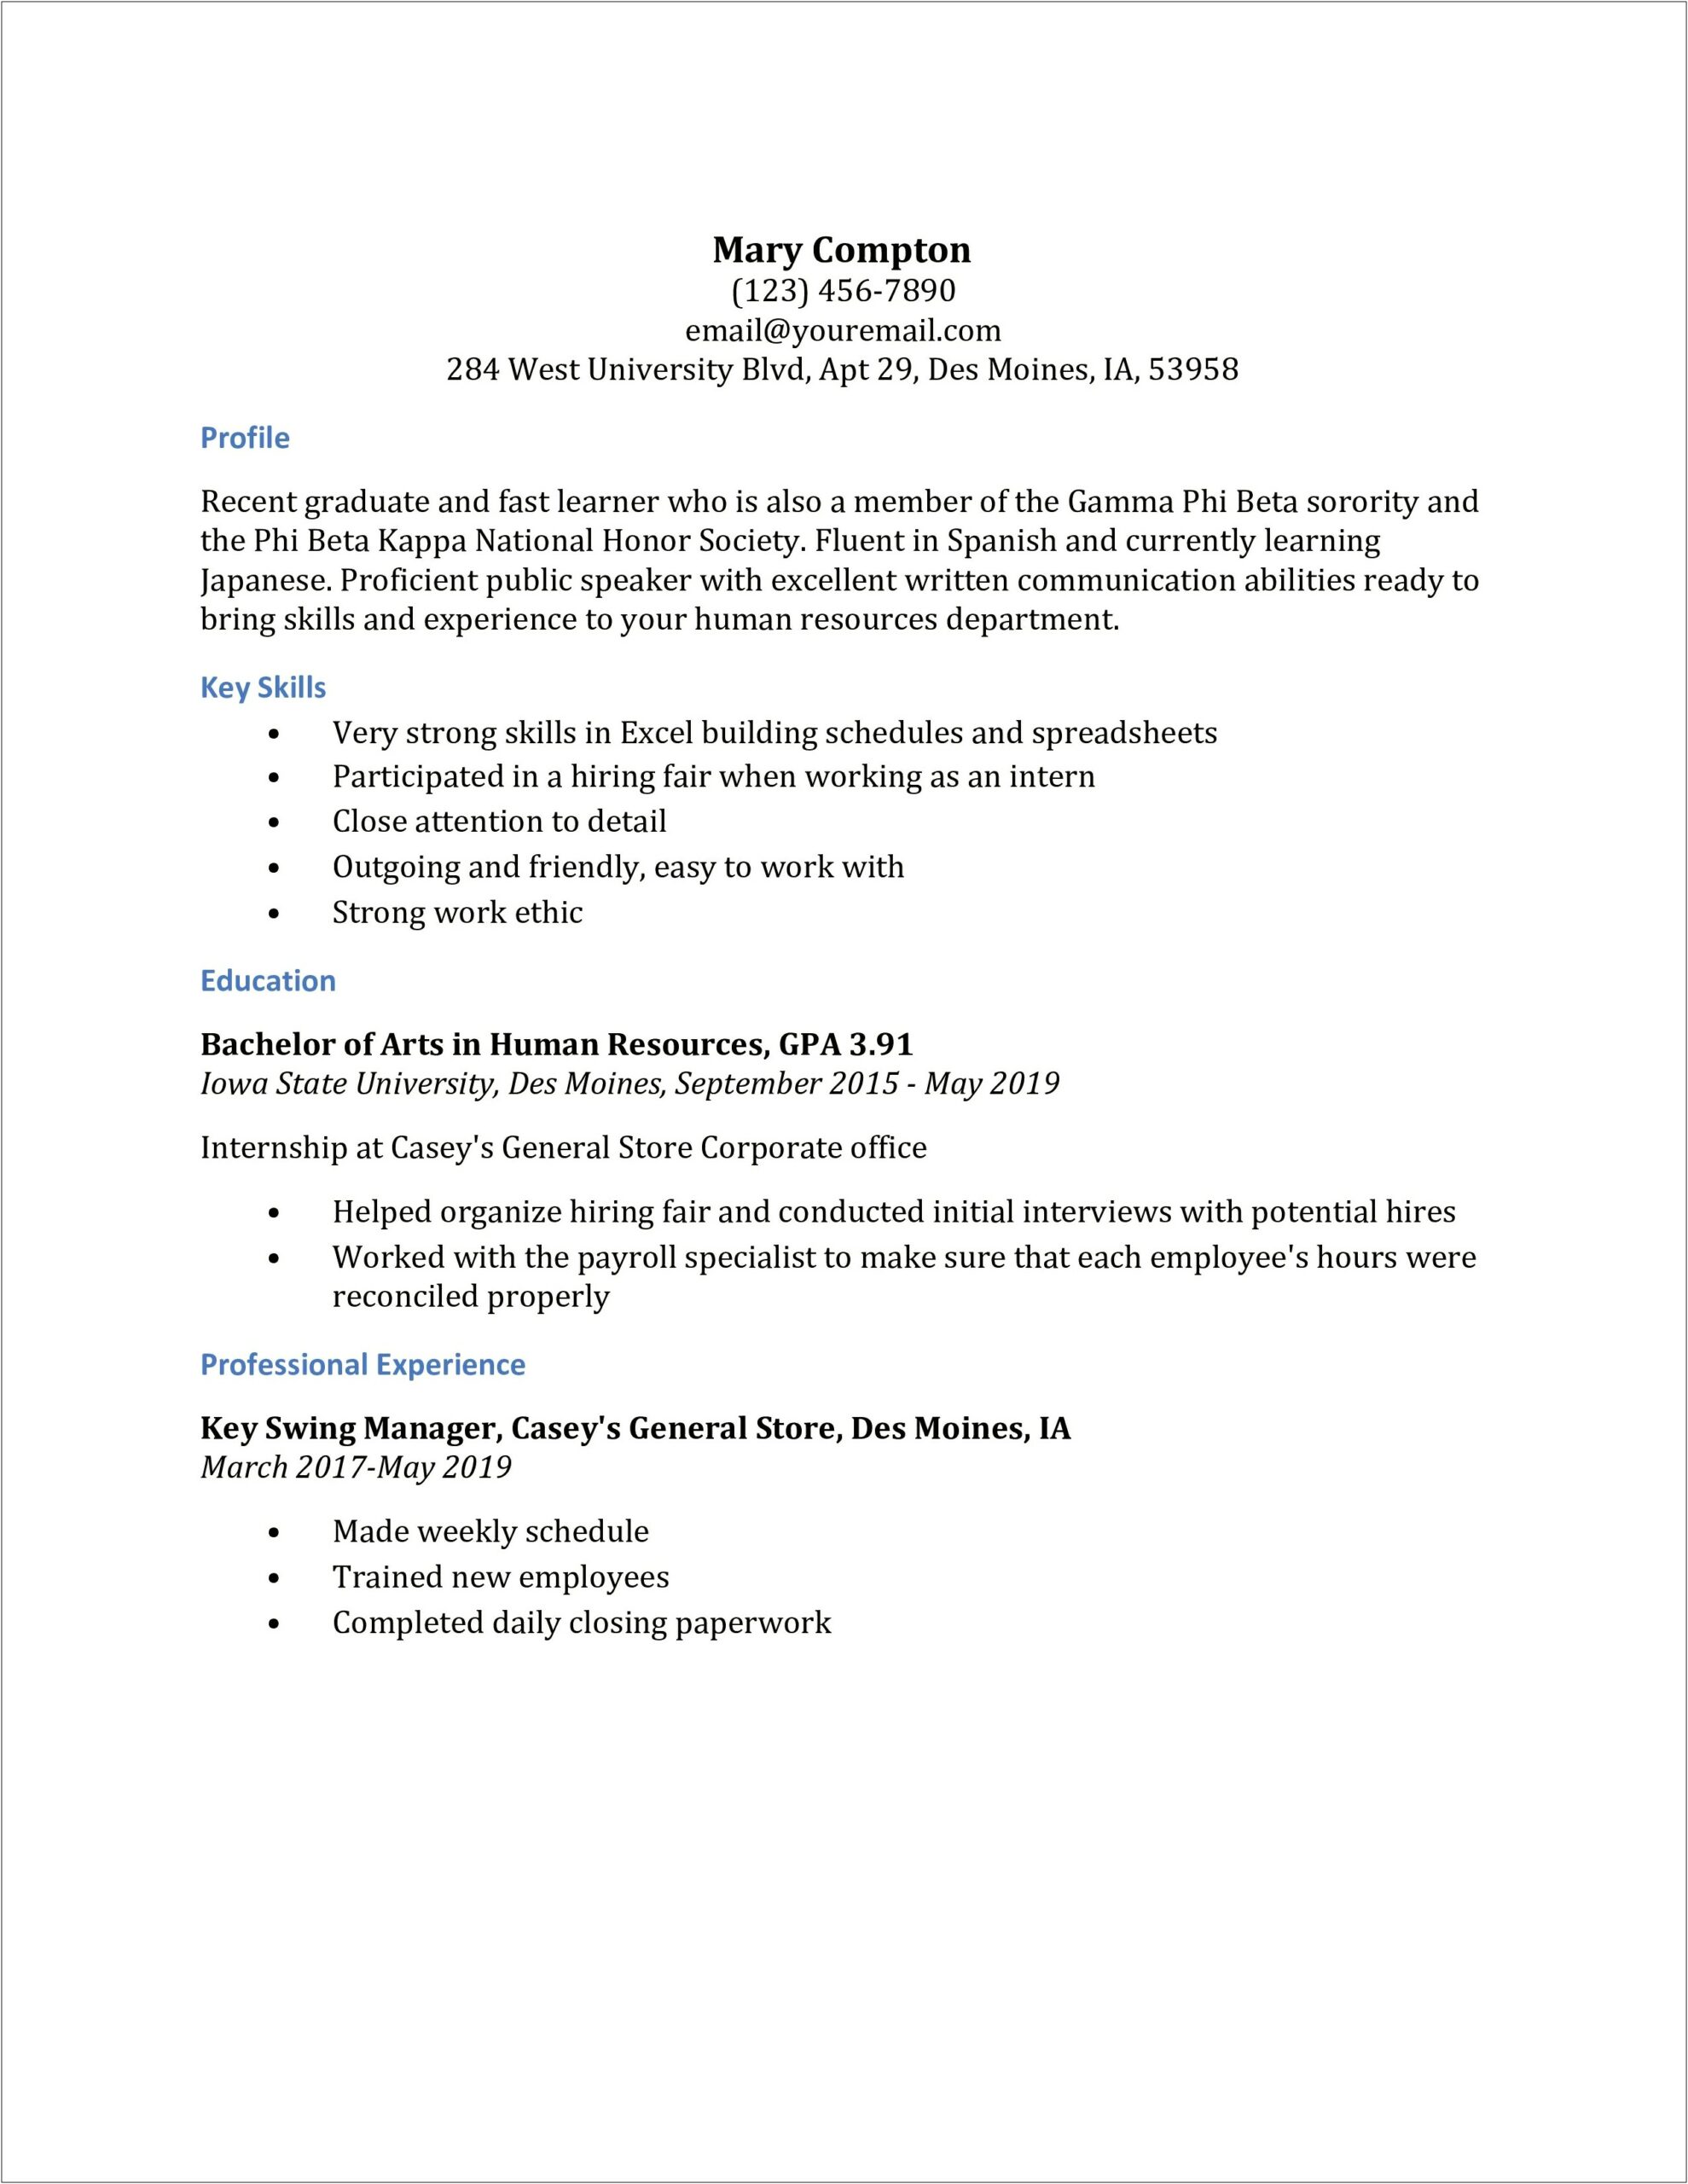 Example 2019 Human Resources Resume